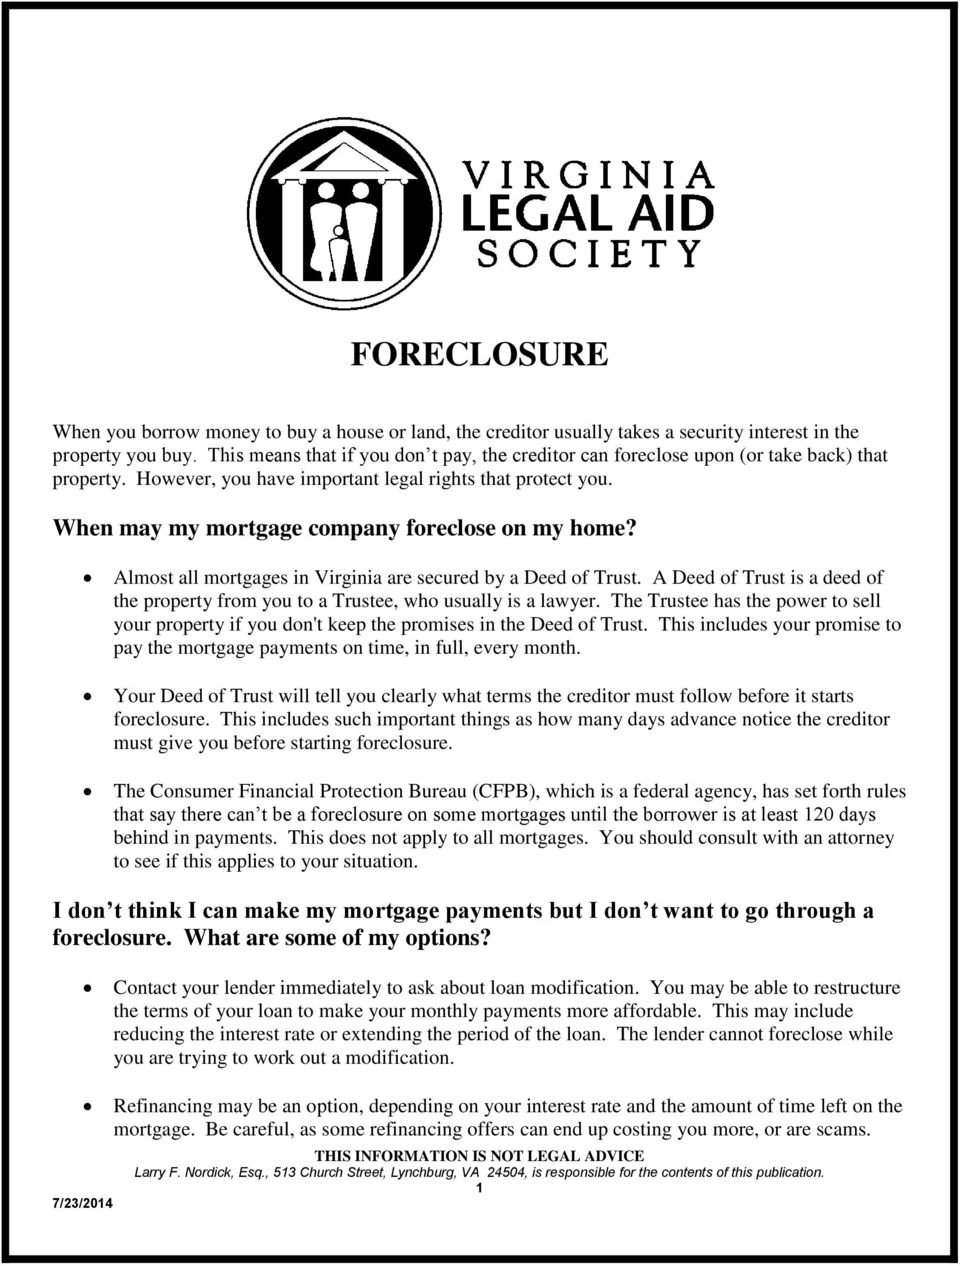 When may my mortgage company foreclose on my home? Almost all mortgages in Virginia are secured by a Deed of Trust.